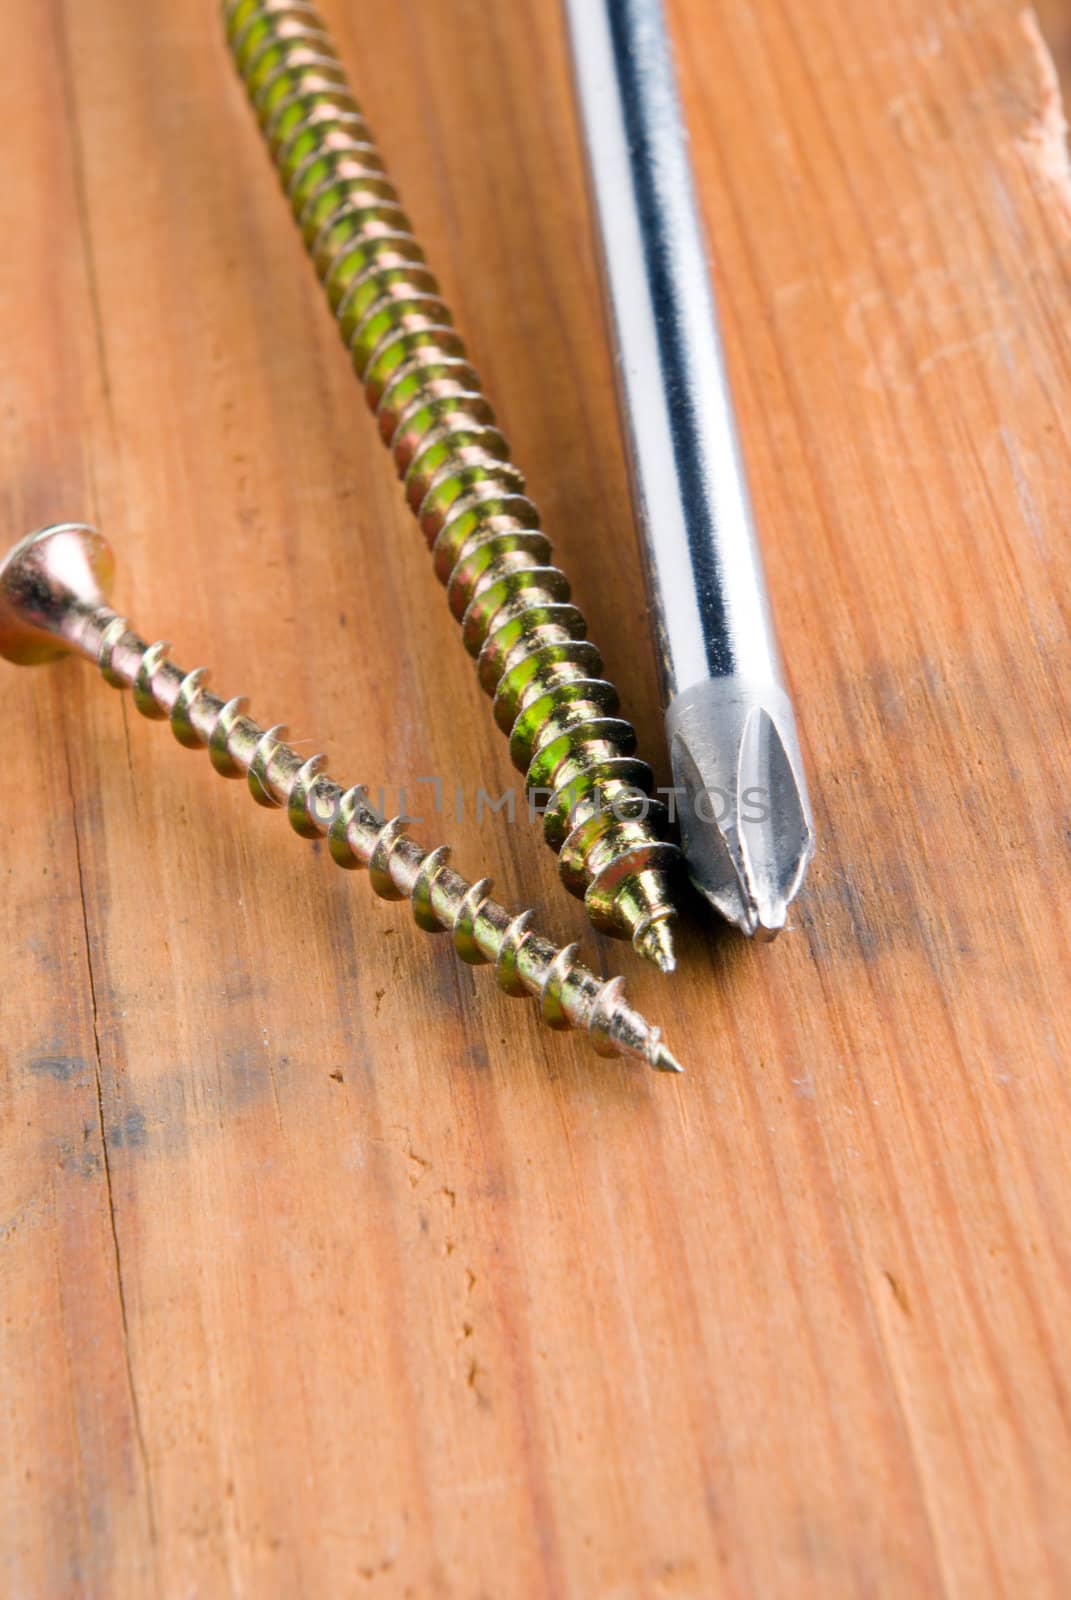 Screw on a wooden background